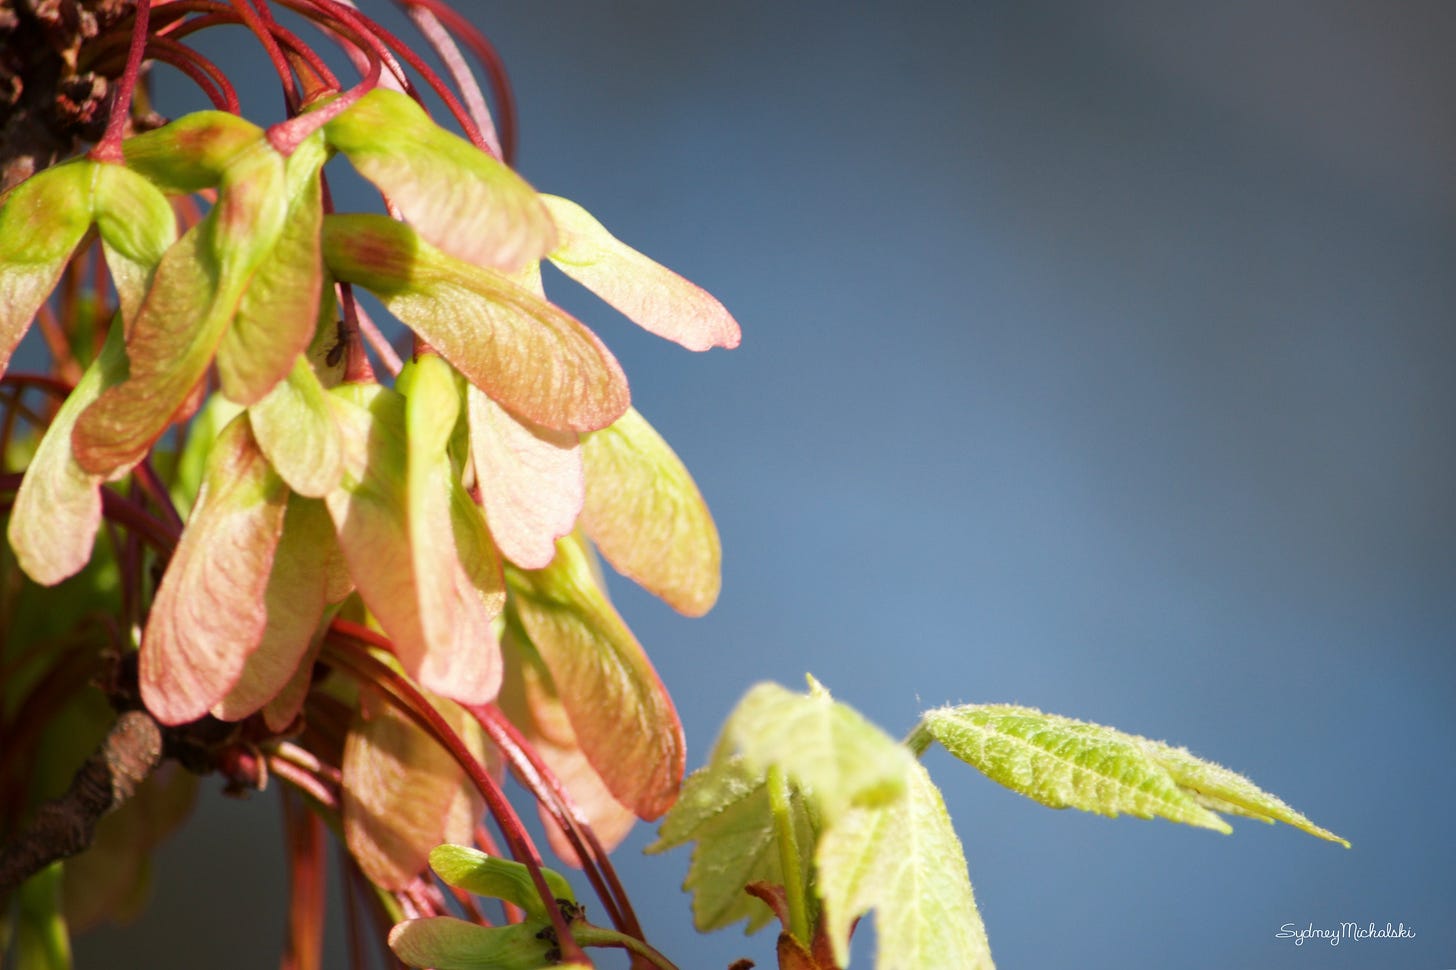 Shimmery pink and green maple samaras cluster with early leaves.